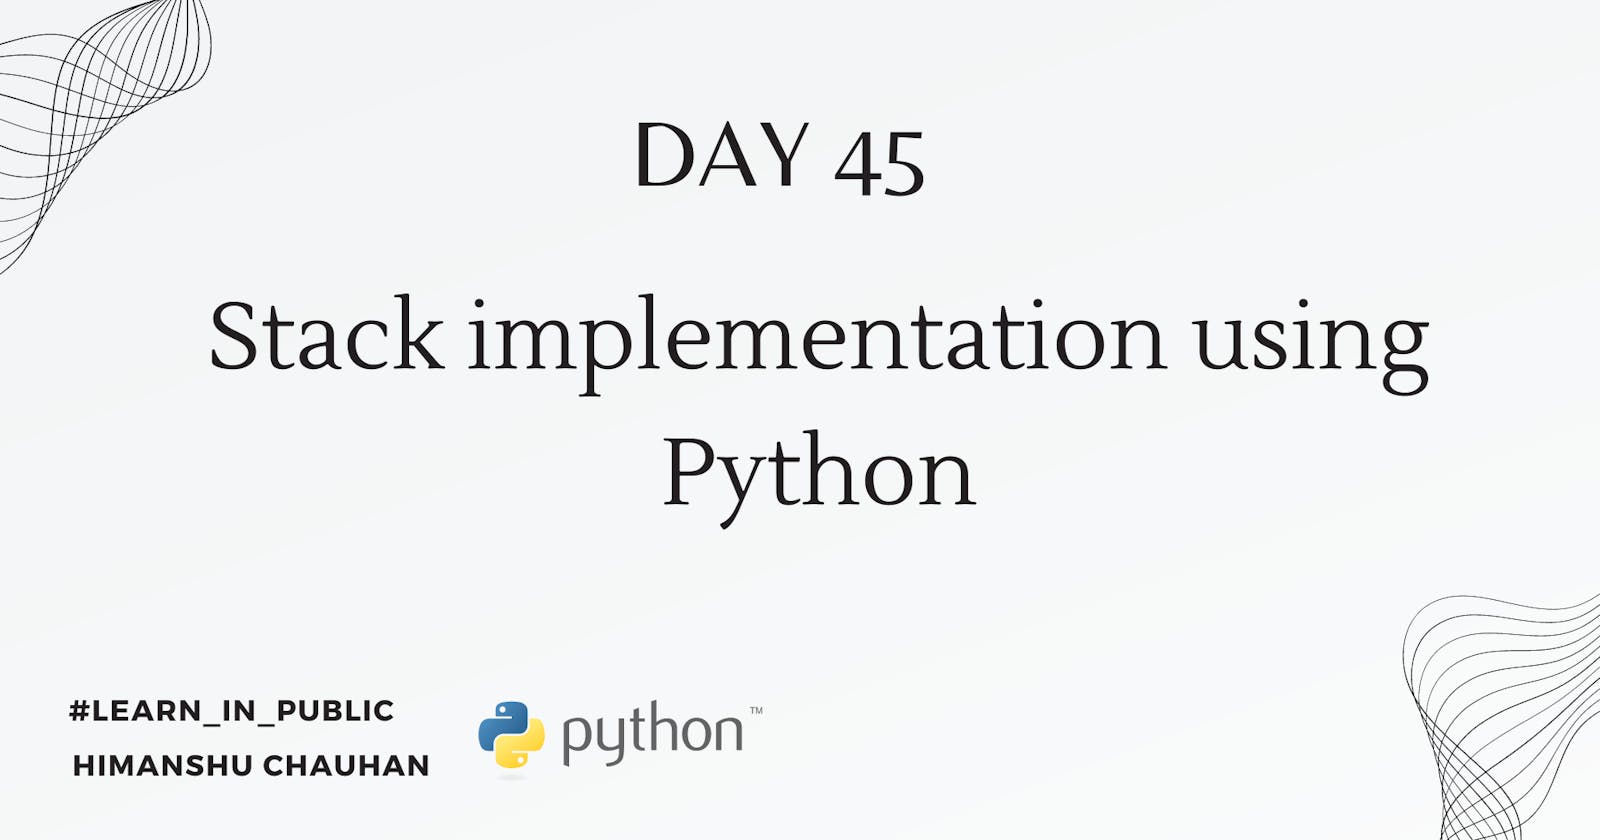 Day 45: Stack implementation using Python